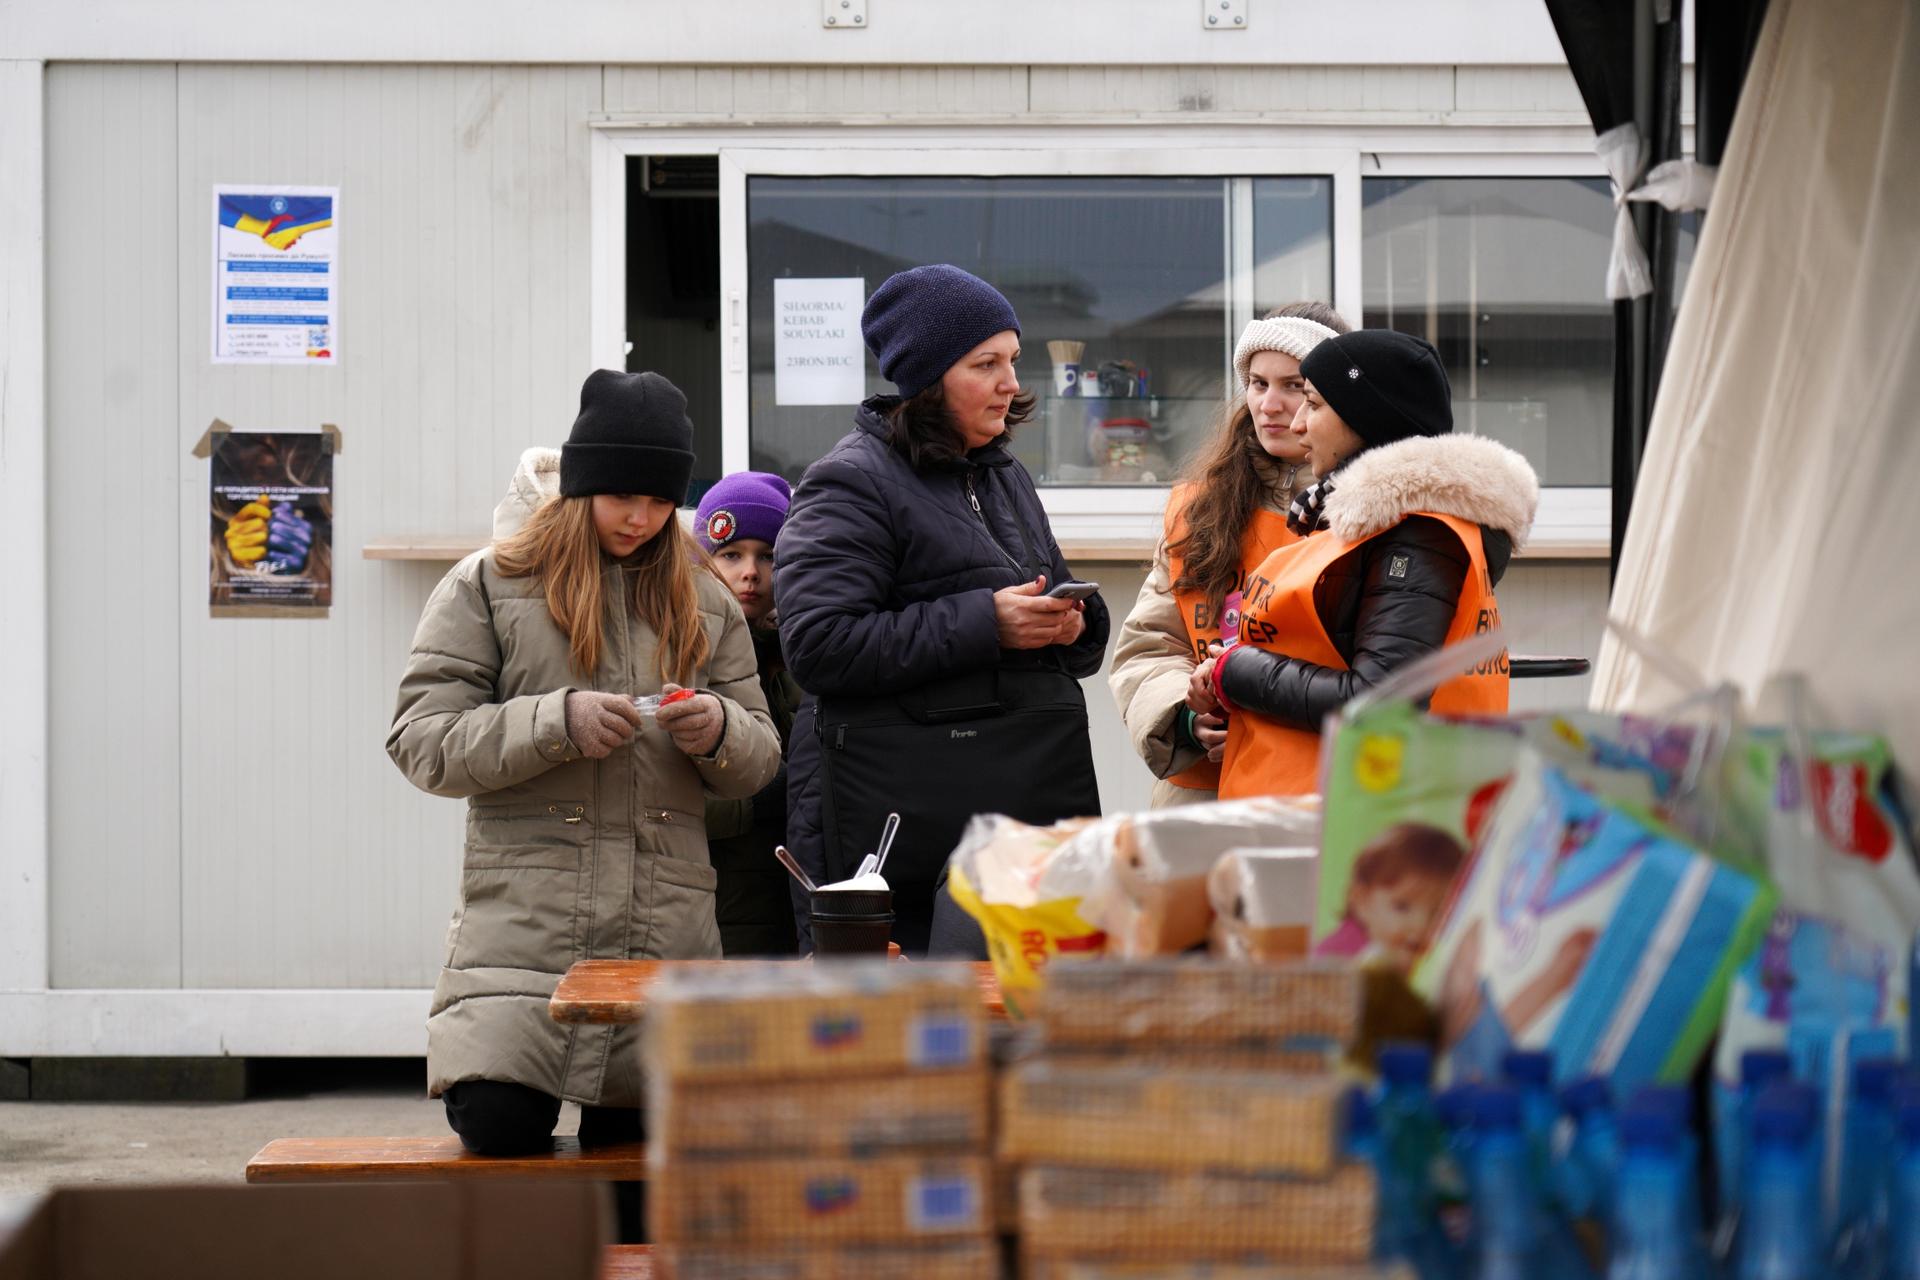 Once at customs in Isaccea, alone, on Romania’s southern border, refugees are directed to inflatable orange tents serving hot tea and sandwiches while they wait to go through passport control.